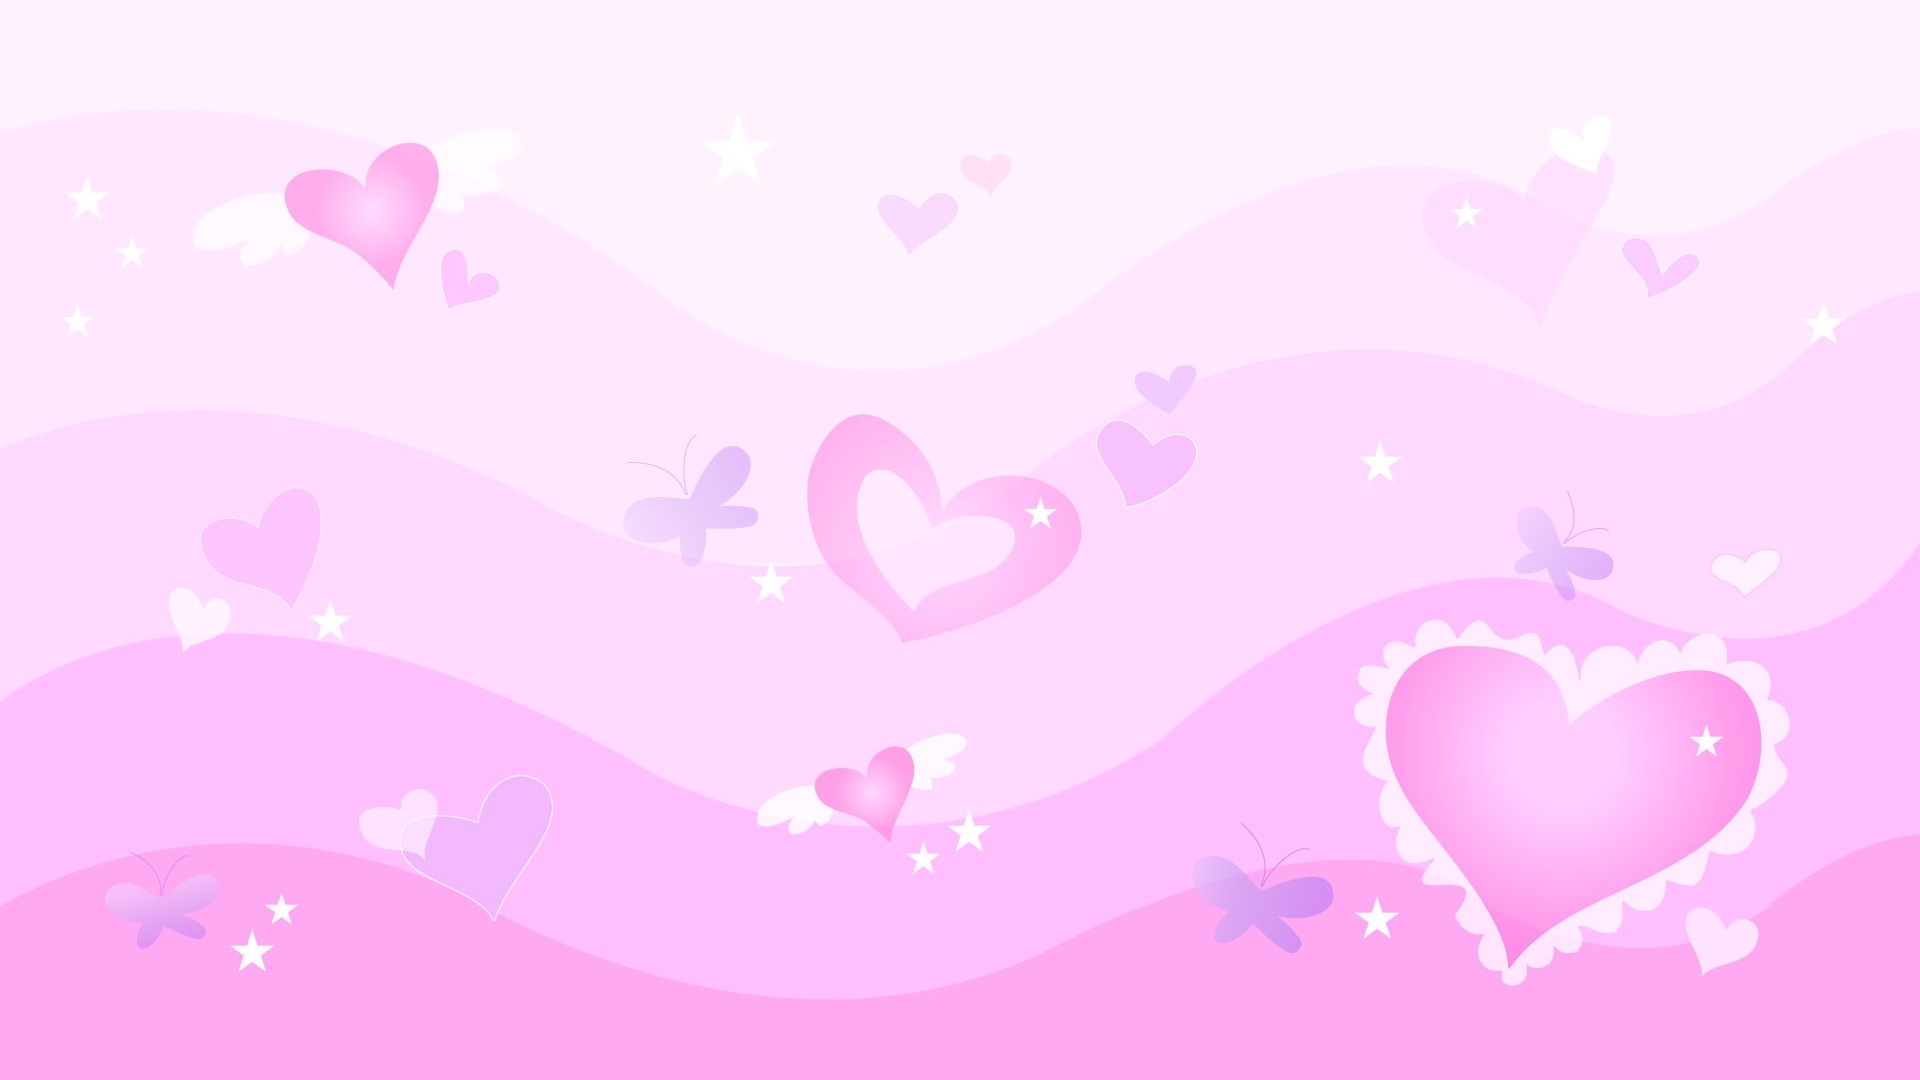 Valentine's Day Love Theme Wallpapers (2) #4 - 1920x1080